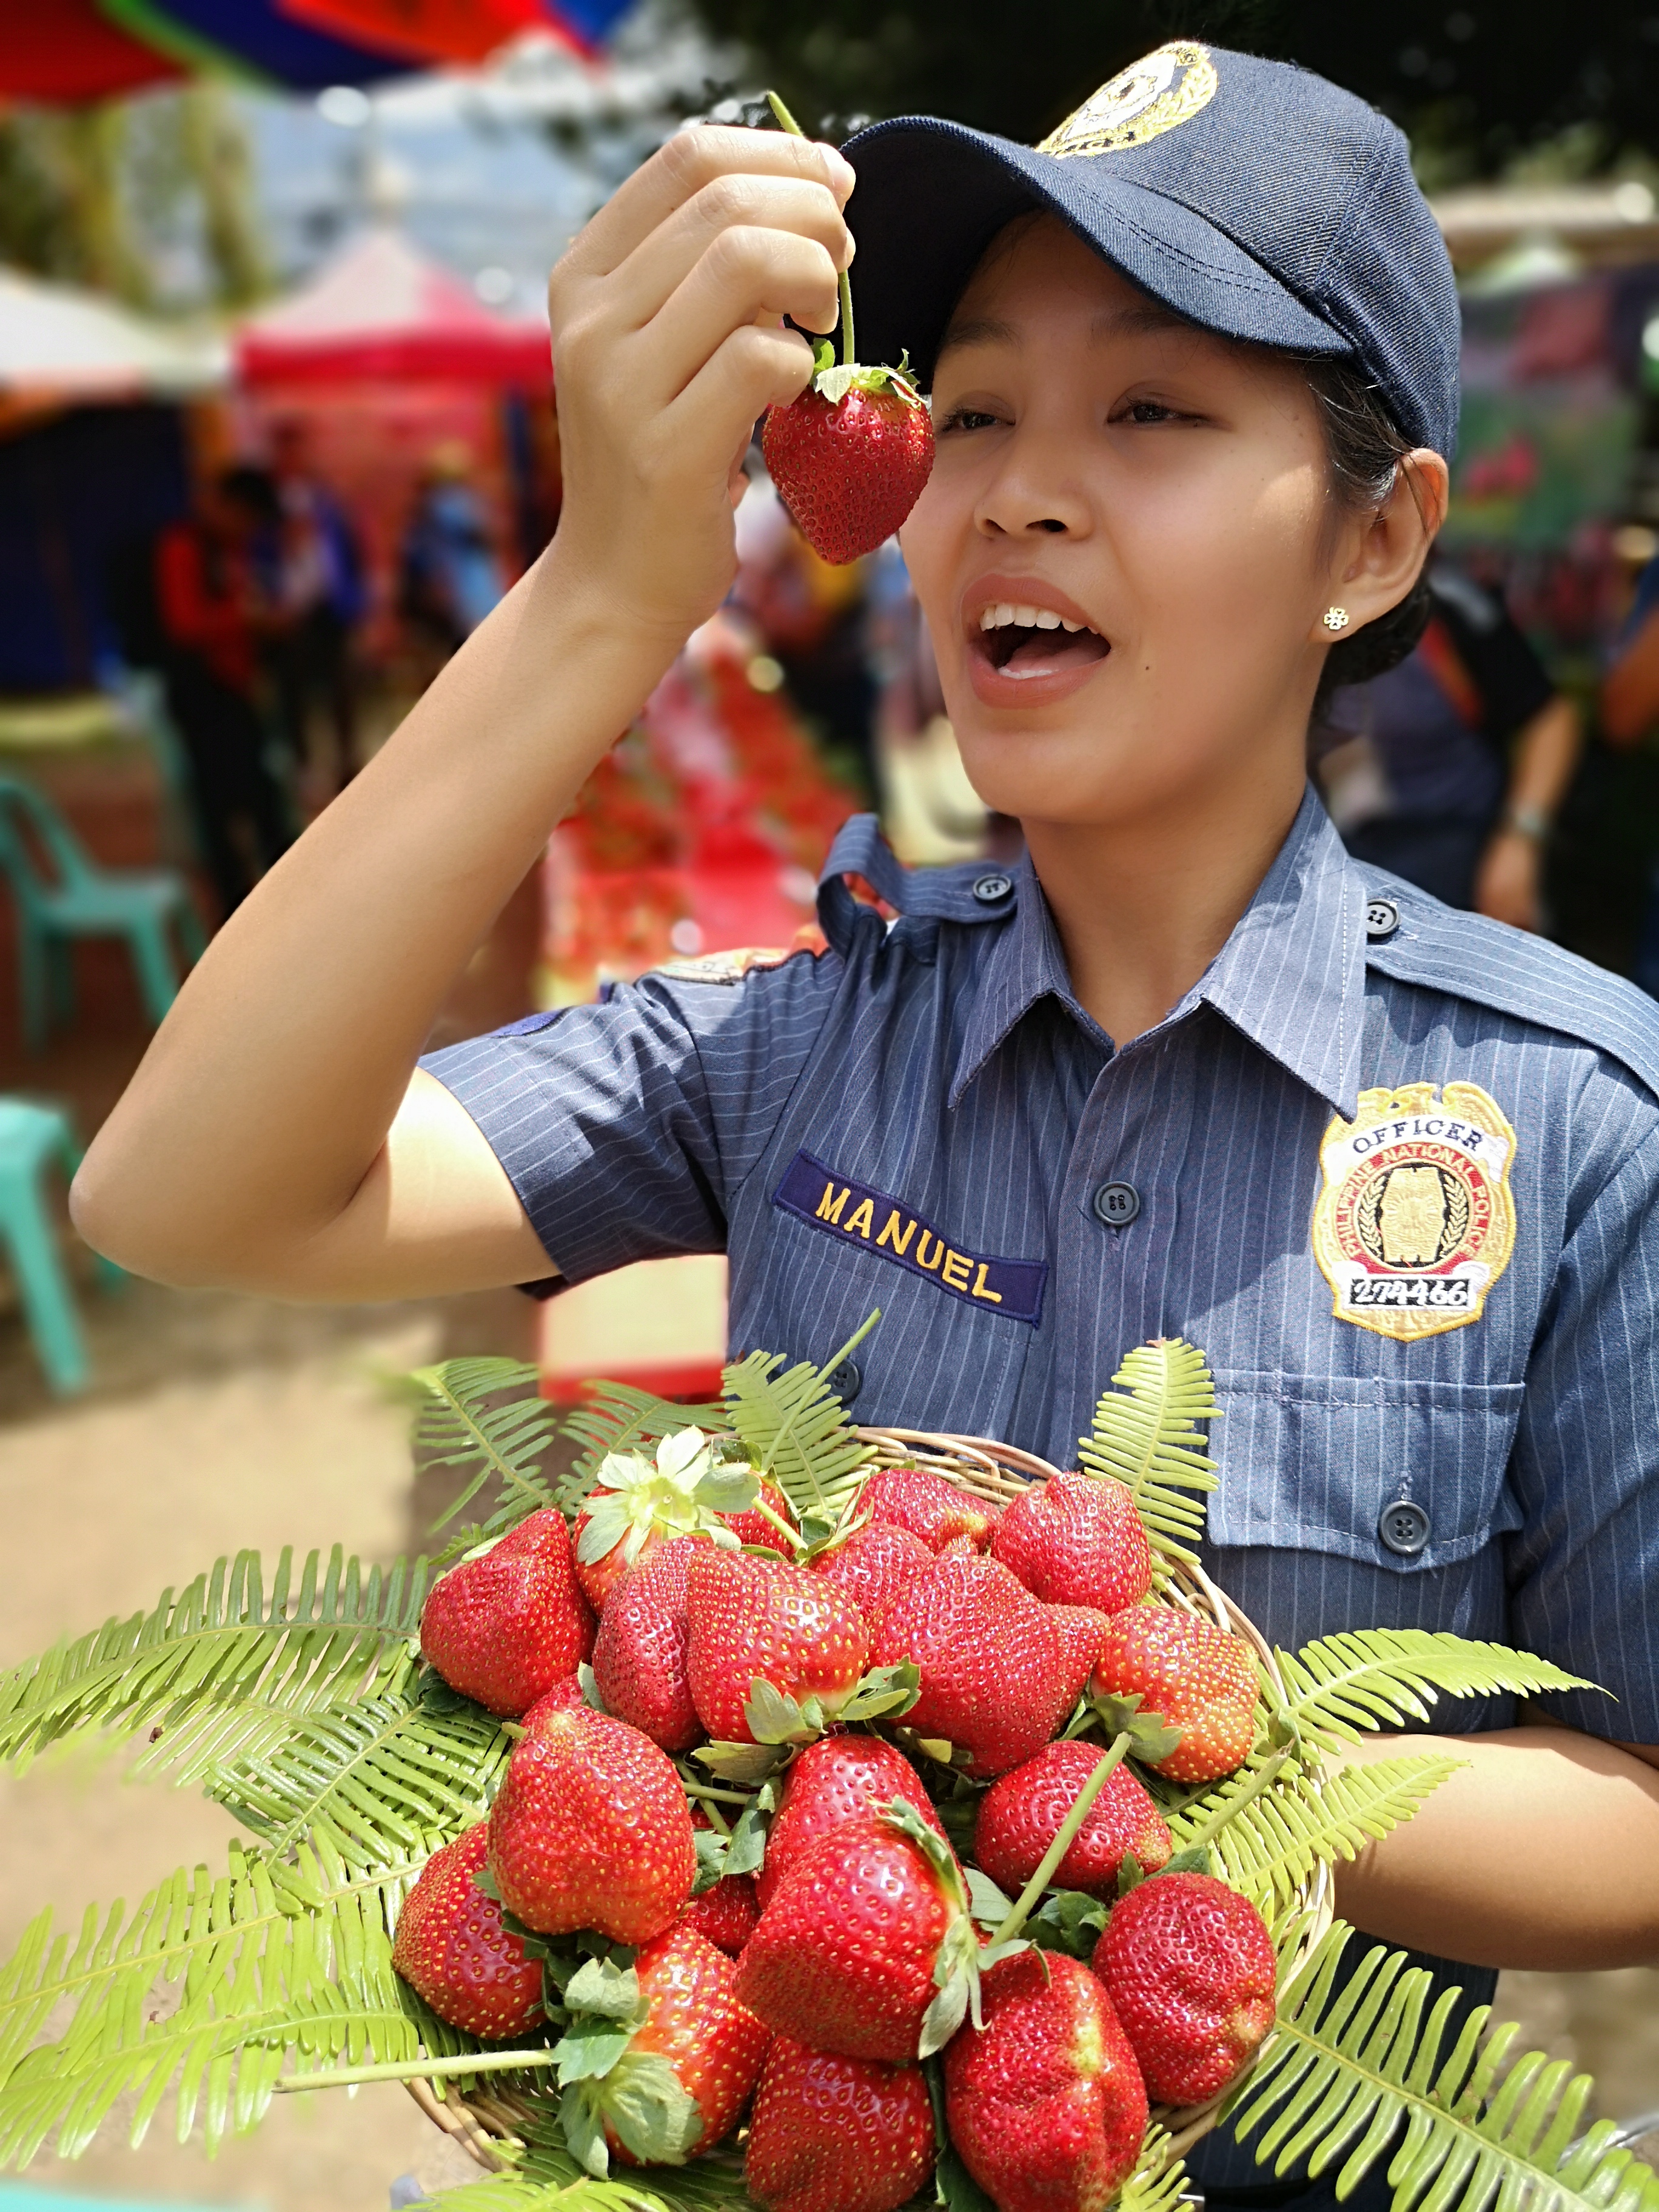 After flowerfest, tourists drawn to Strawberry Fest in Benguet capital